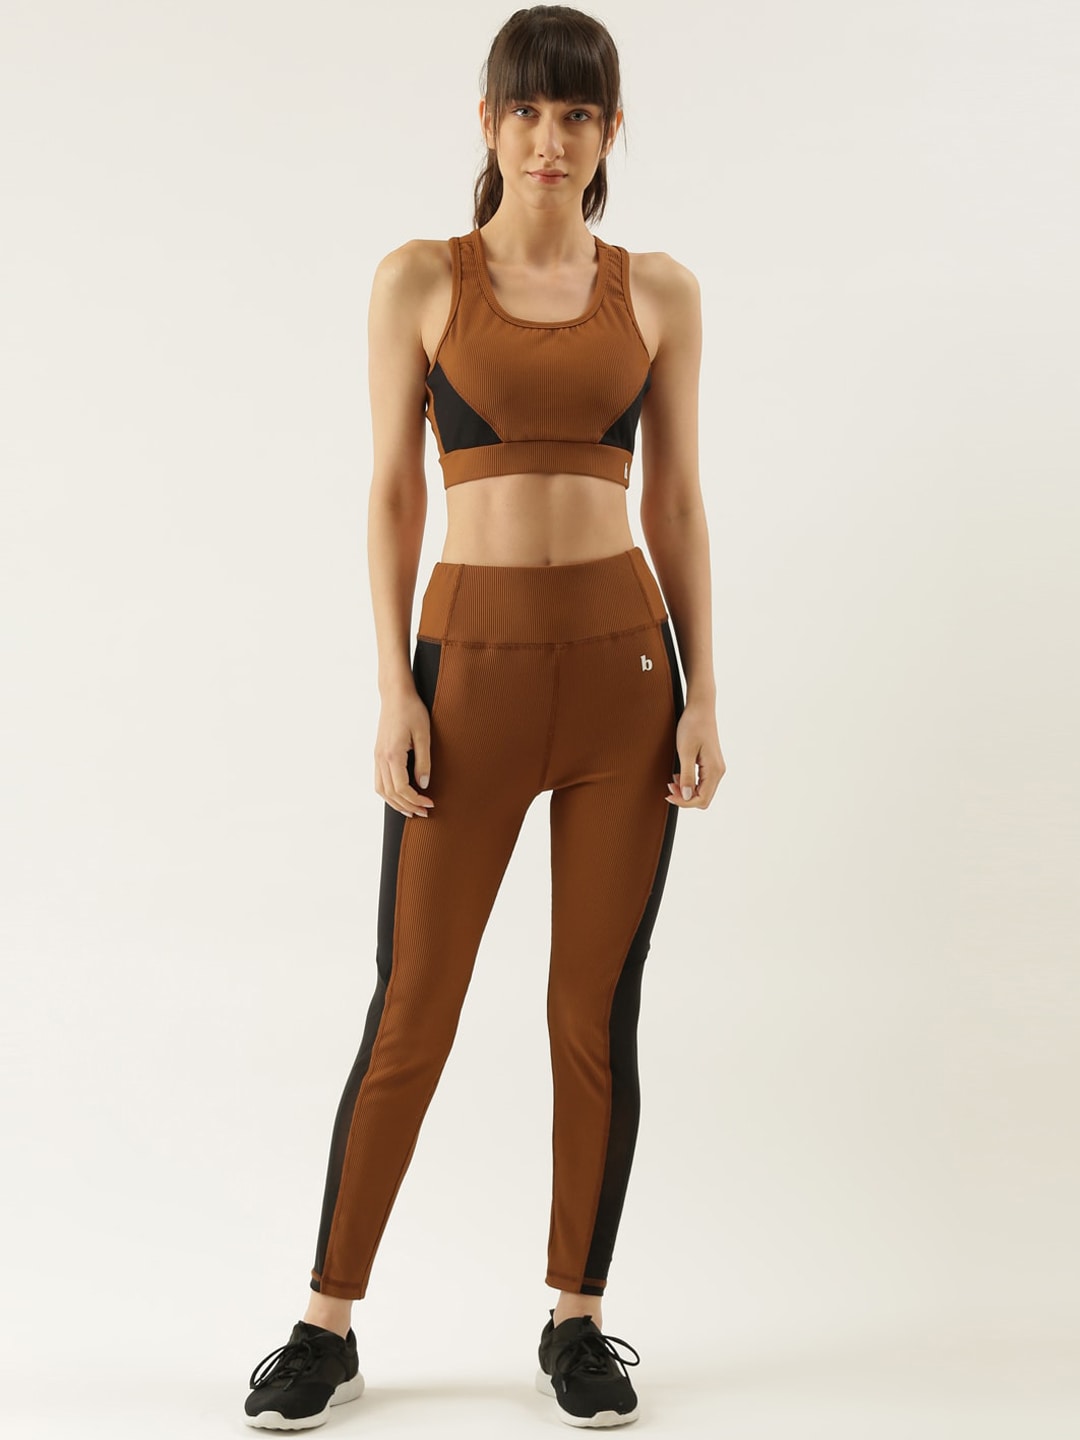 Bannos Swagger Women Brown Tights & Sport Bra Price in India